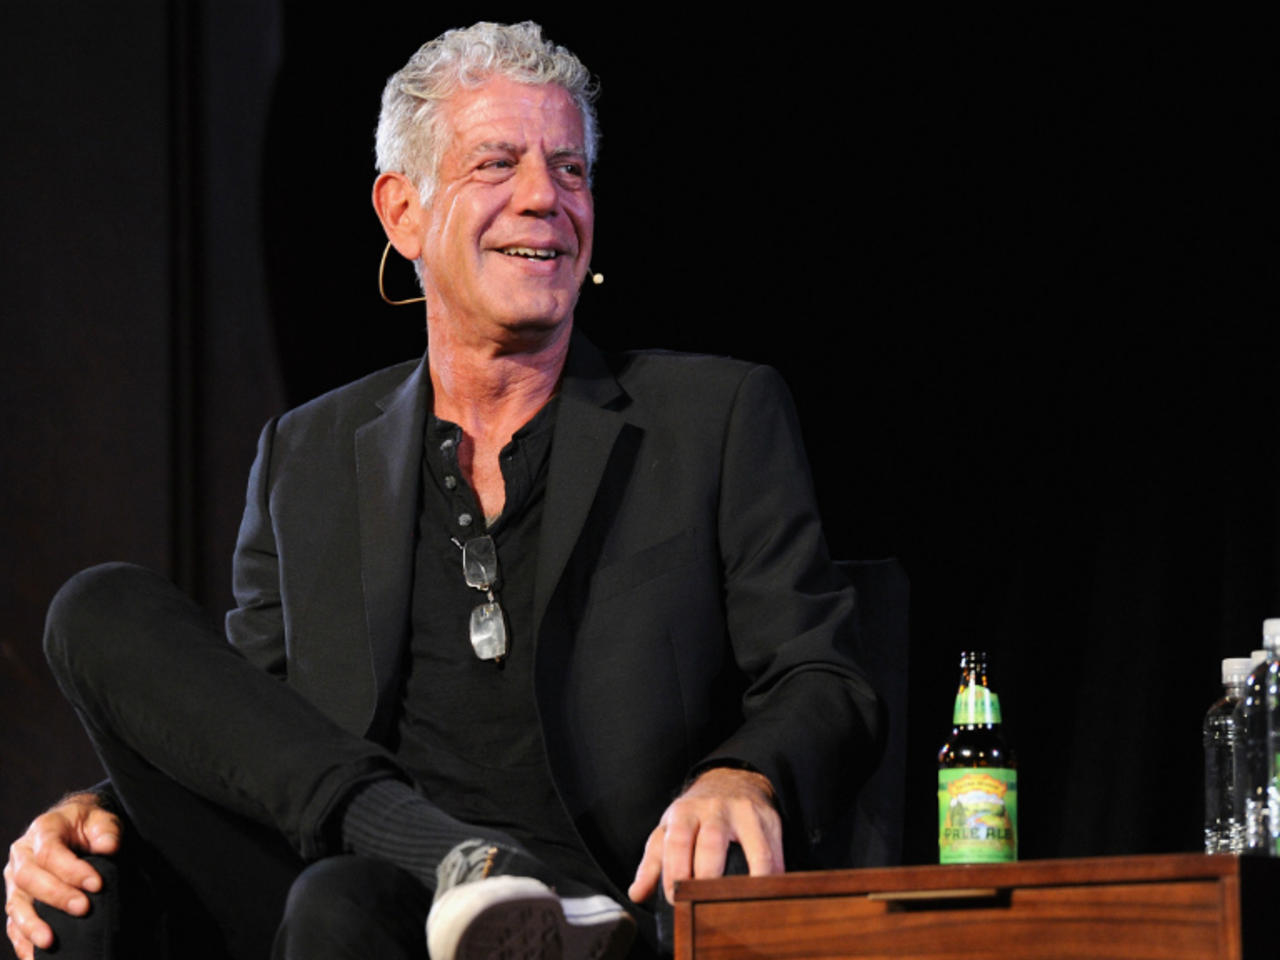 anthony bourdain scholarship created to help culinary students study abroad